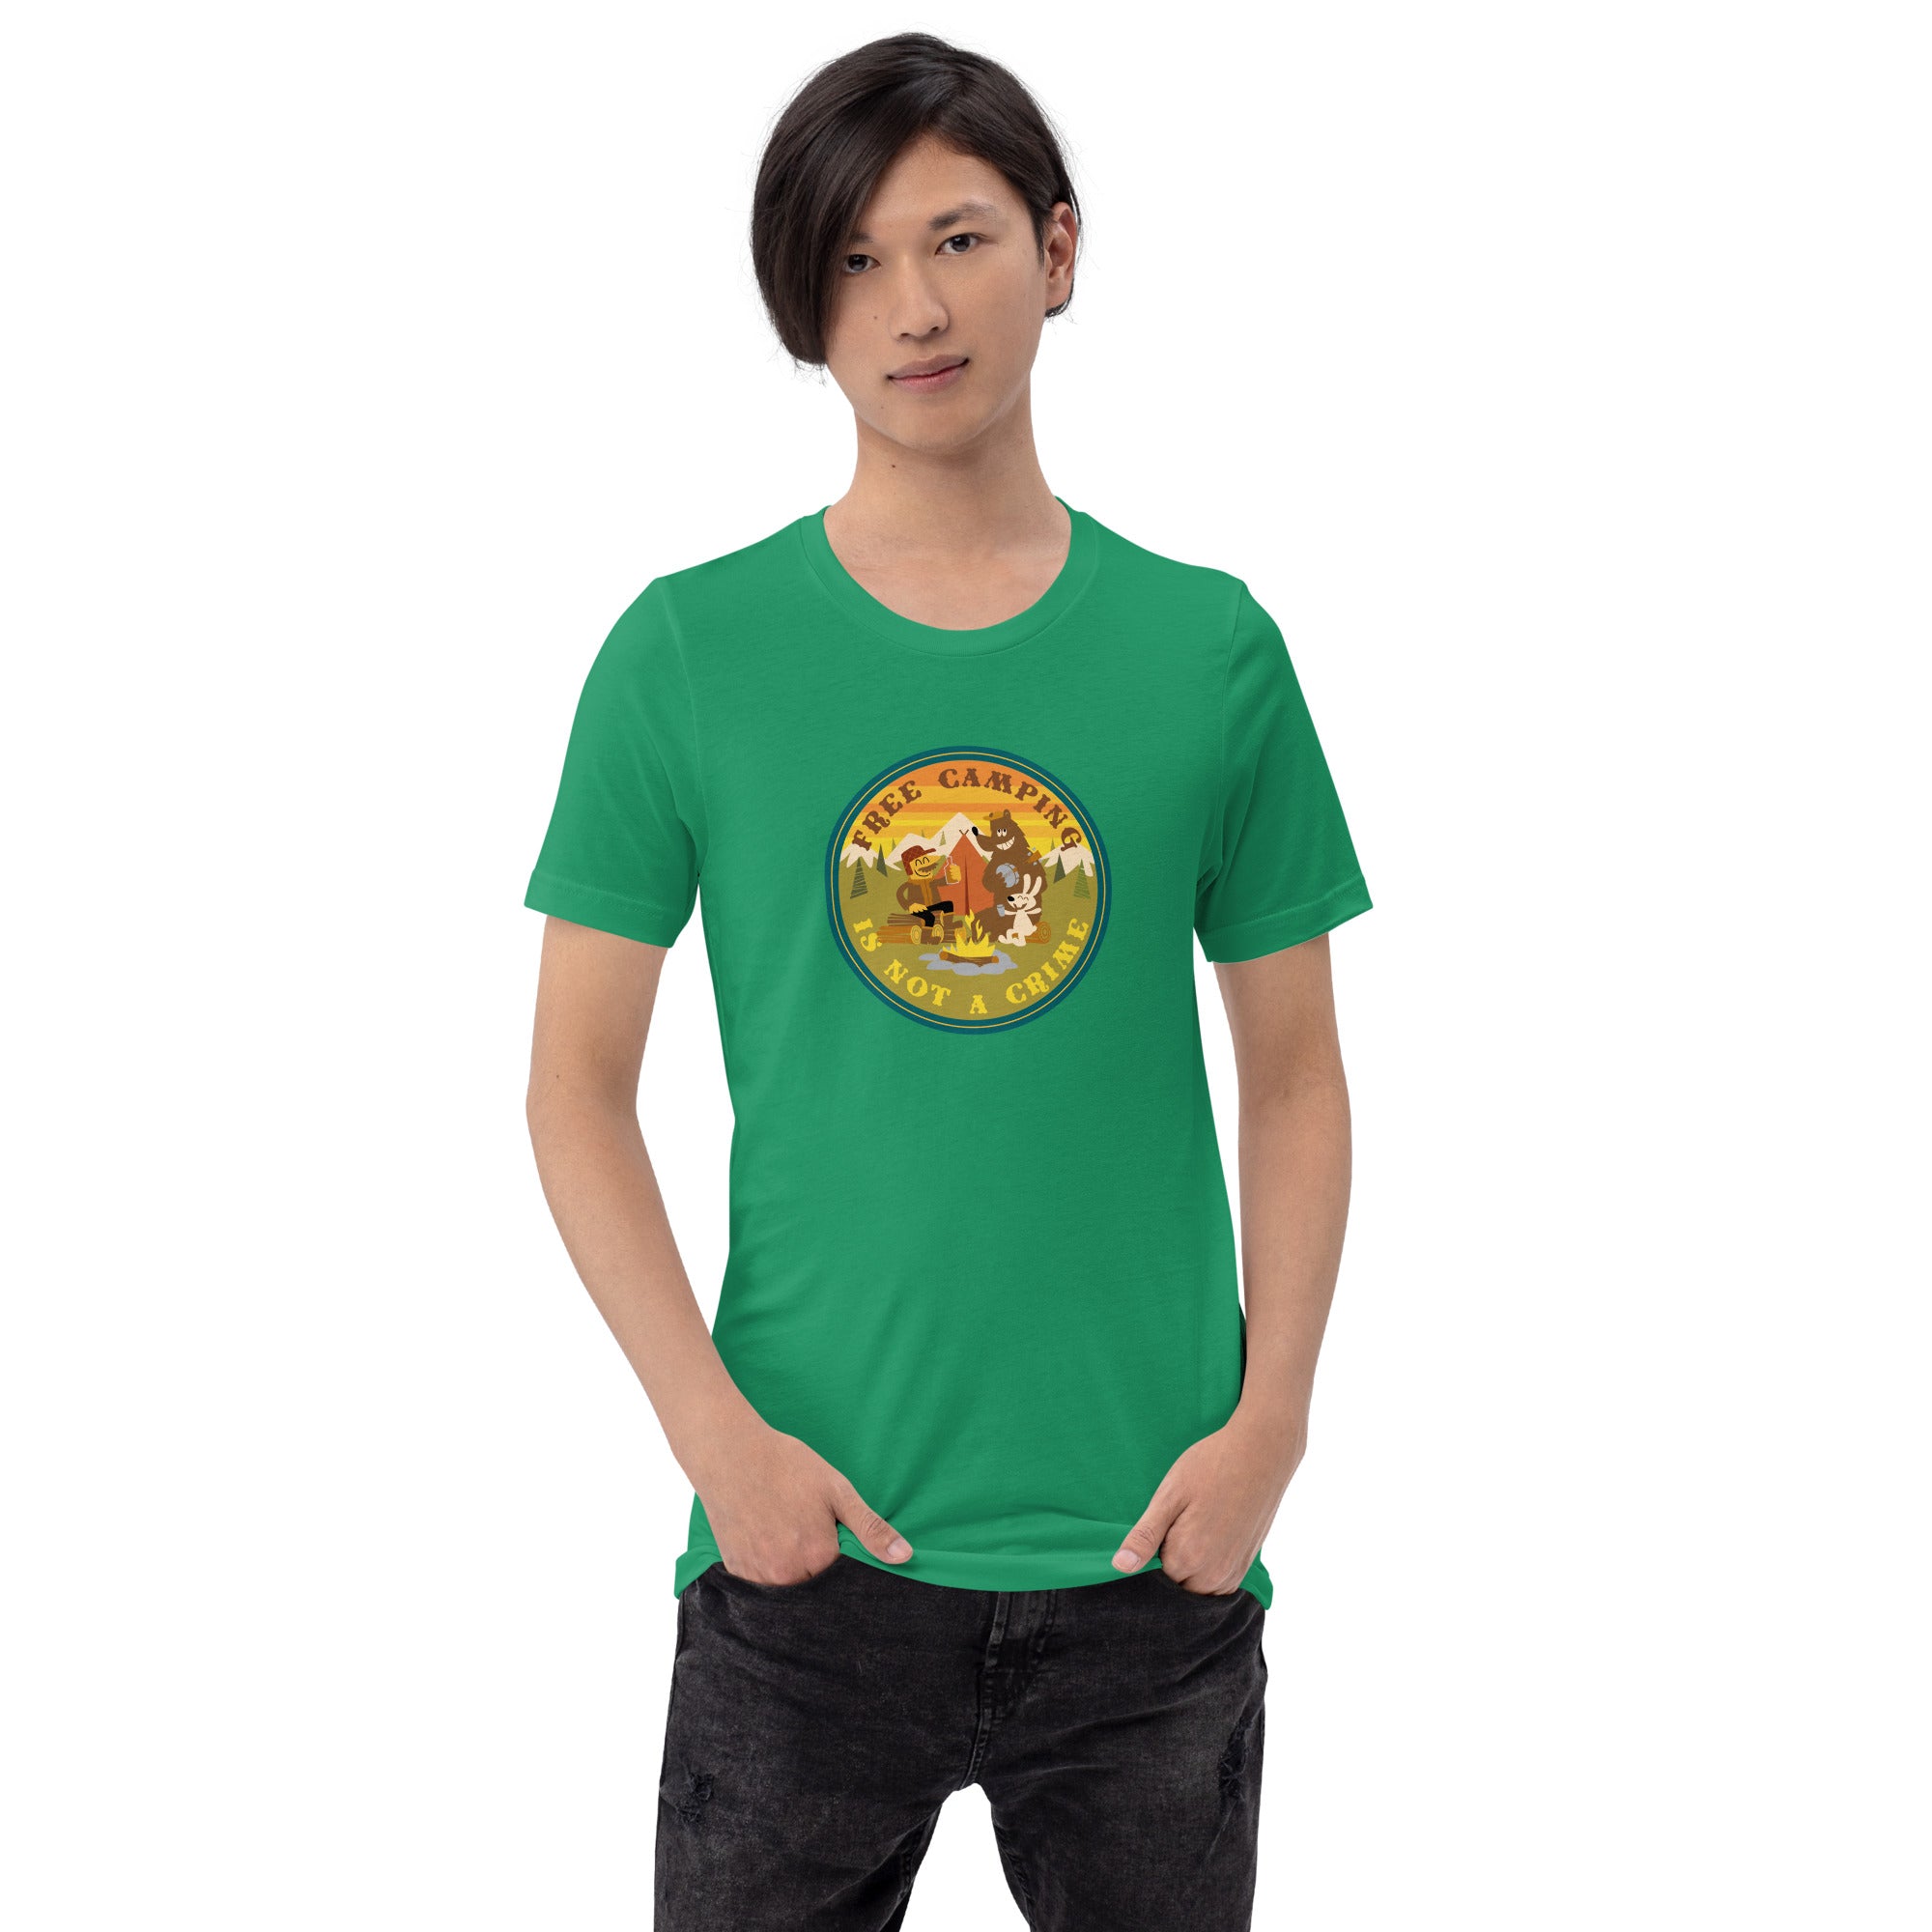 Unisex cotton t-shirt Free Camping is not a Crime on greens